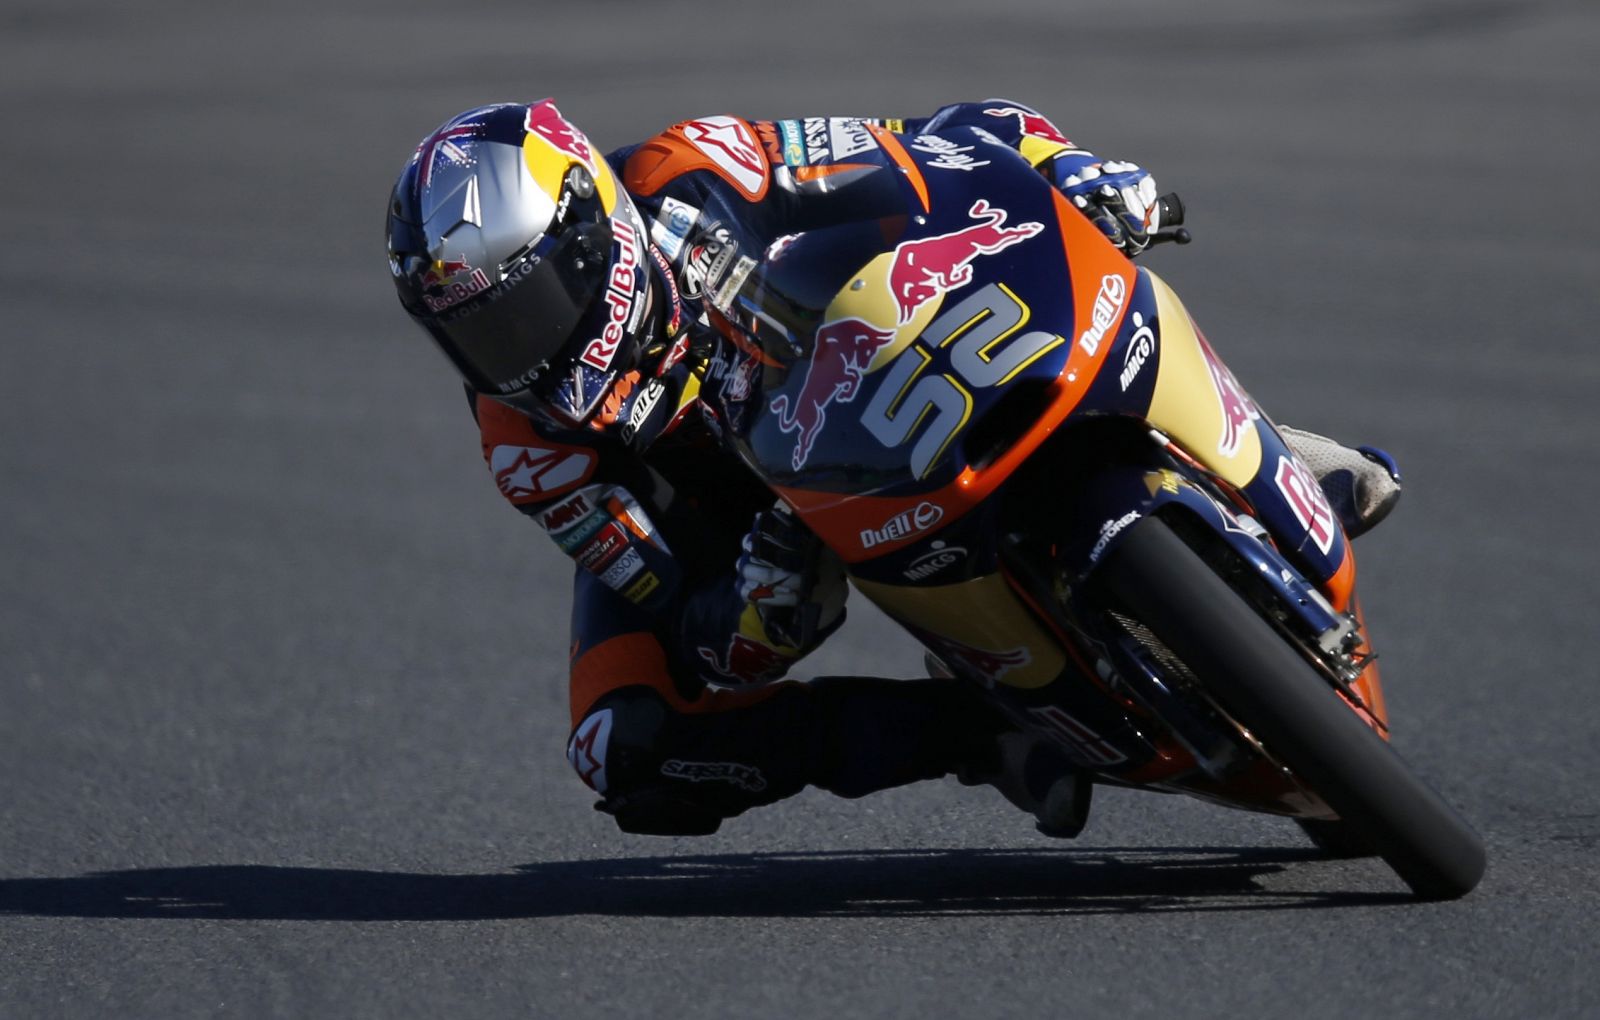 KTM Moto3 rider Kent of Britain rides during a free practice session for Sunday's Japanese Grand Prix in Motegi